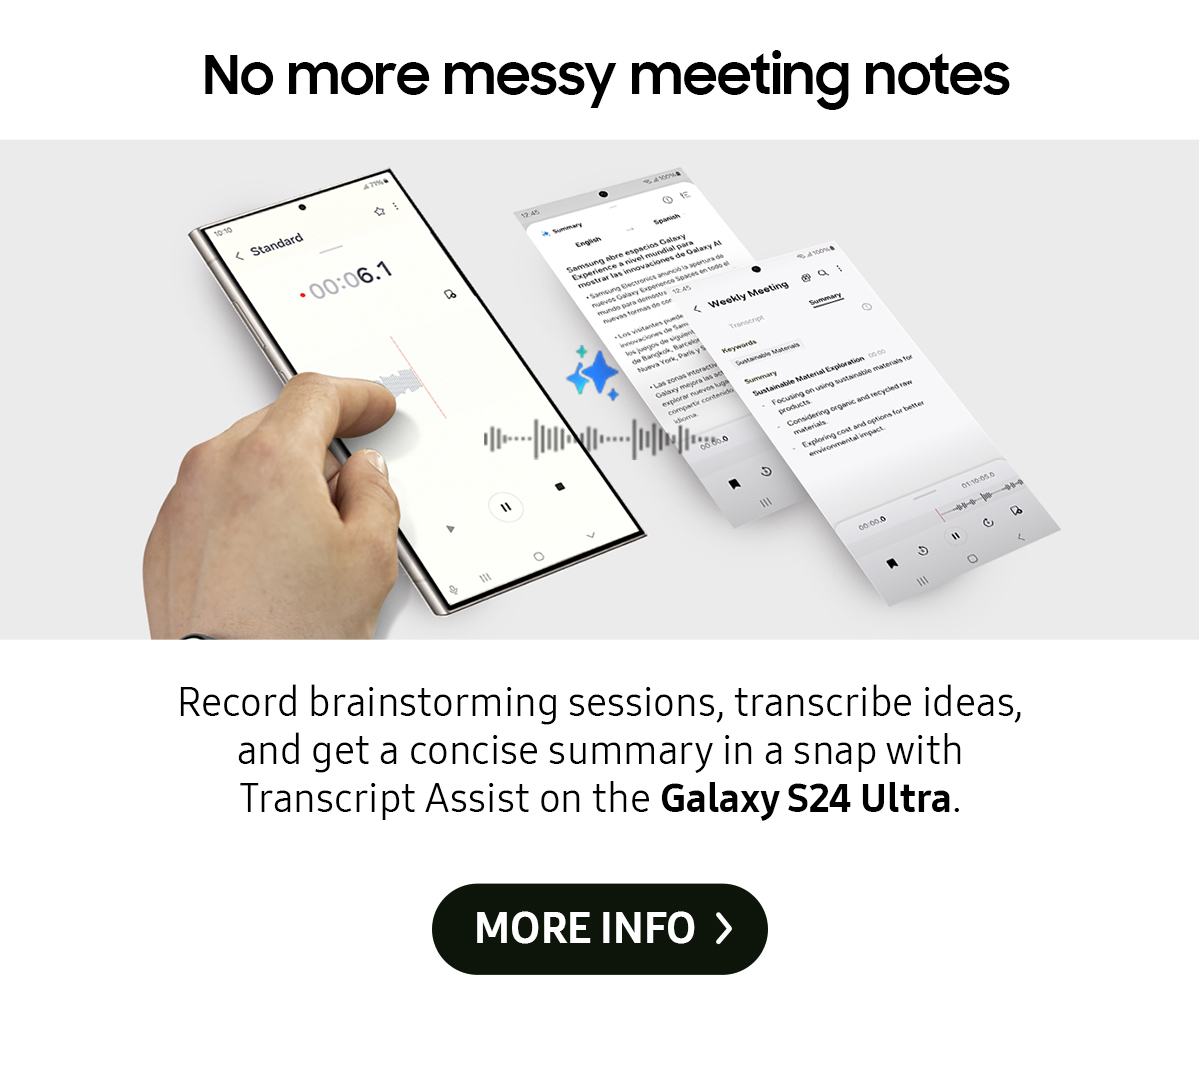 No more messy meeting notes | Record brainstorming sessions, transcribe ideas, and get a concise summary in a snap with Transcript Assist on the Galaxy S24 Ultra.